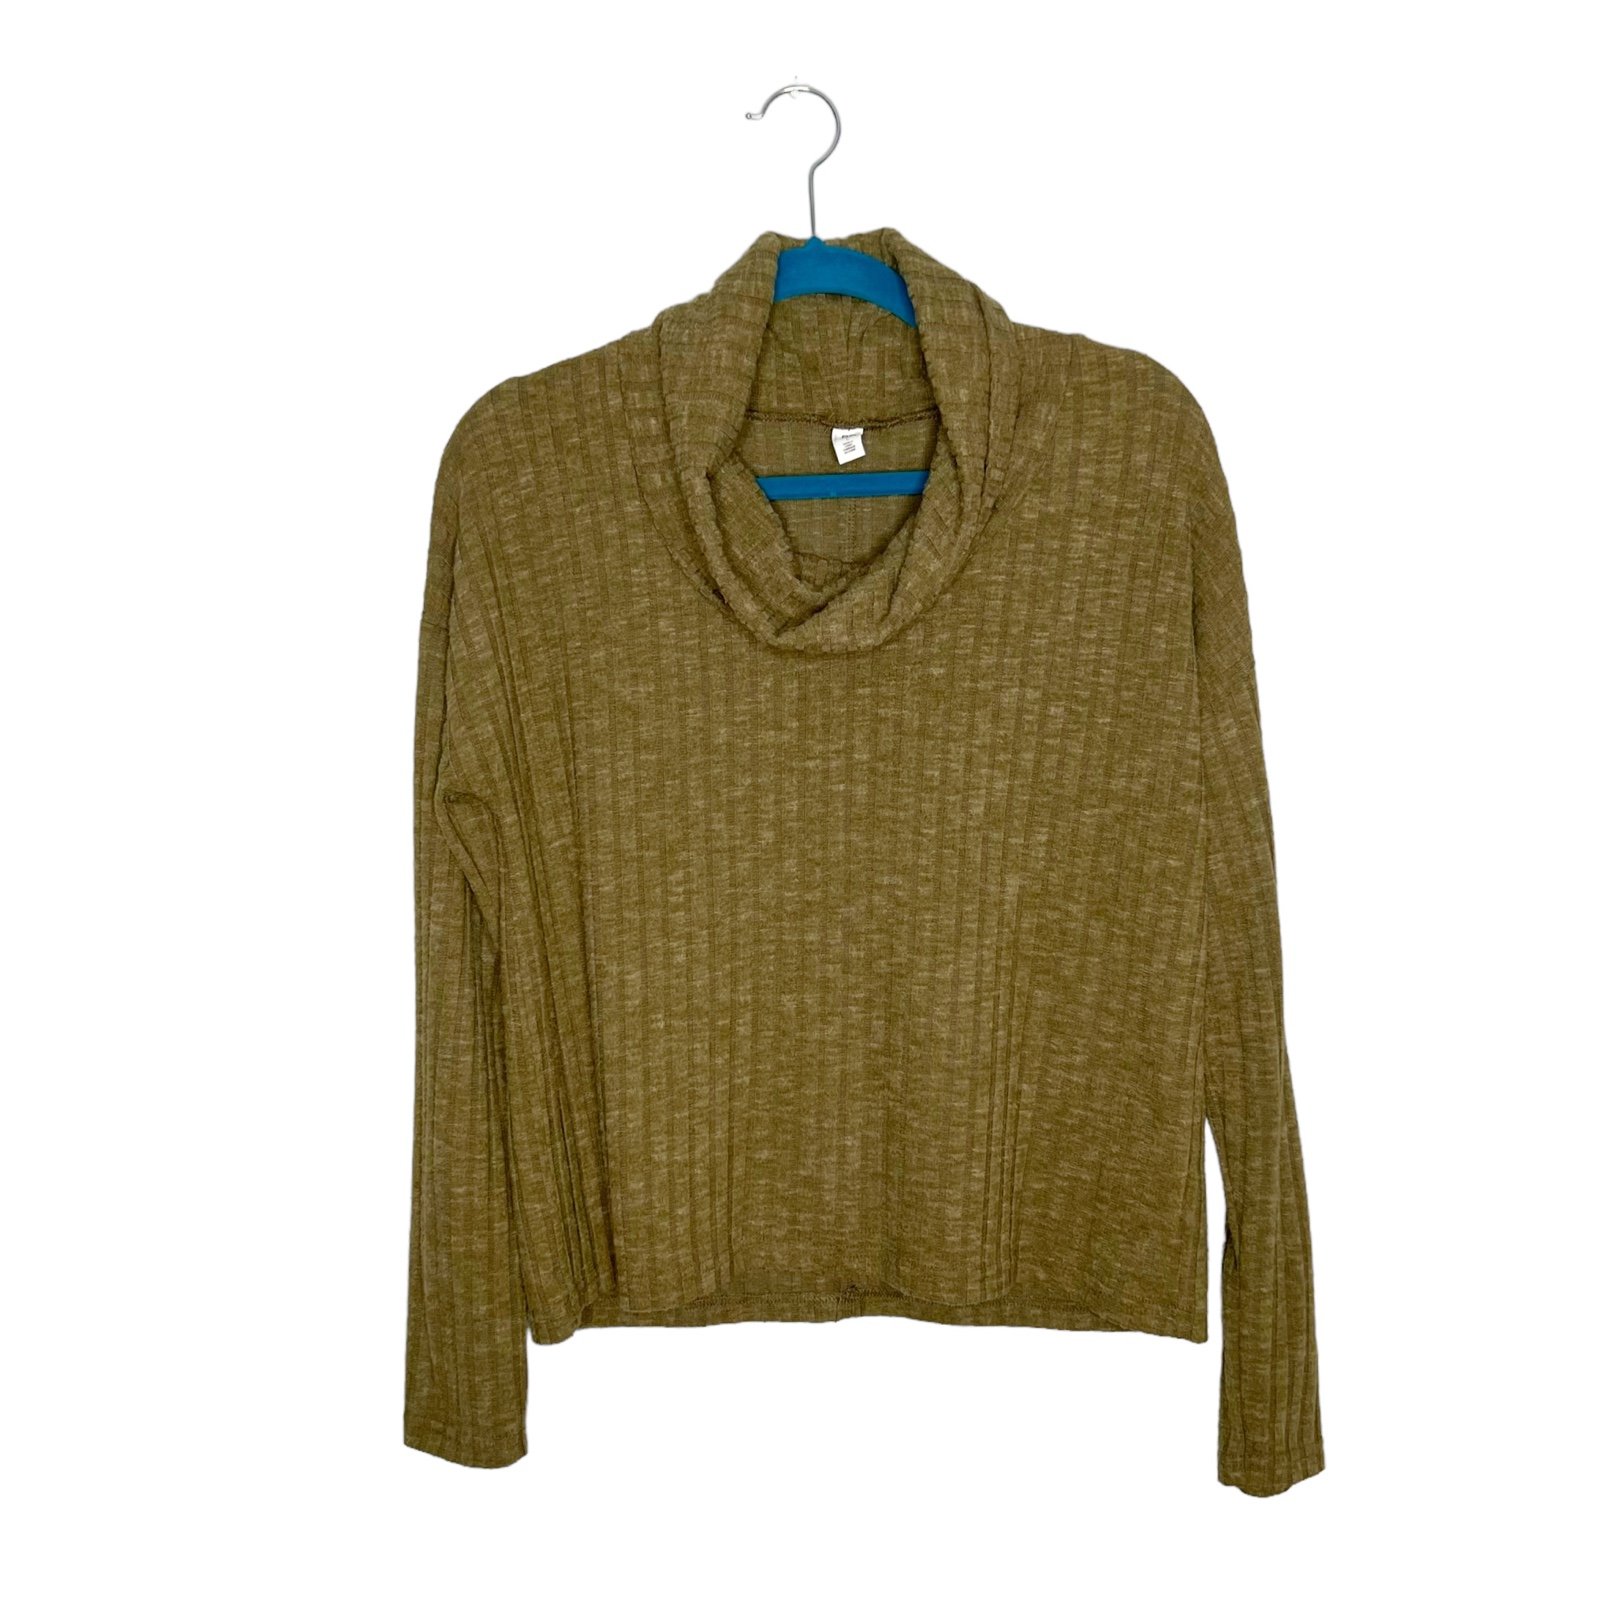 Wholesale price BP Olive Green Cozy Ribbed Knit Turtlen